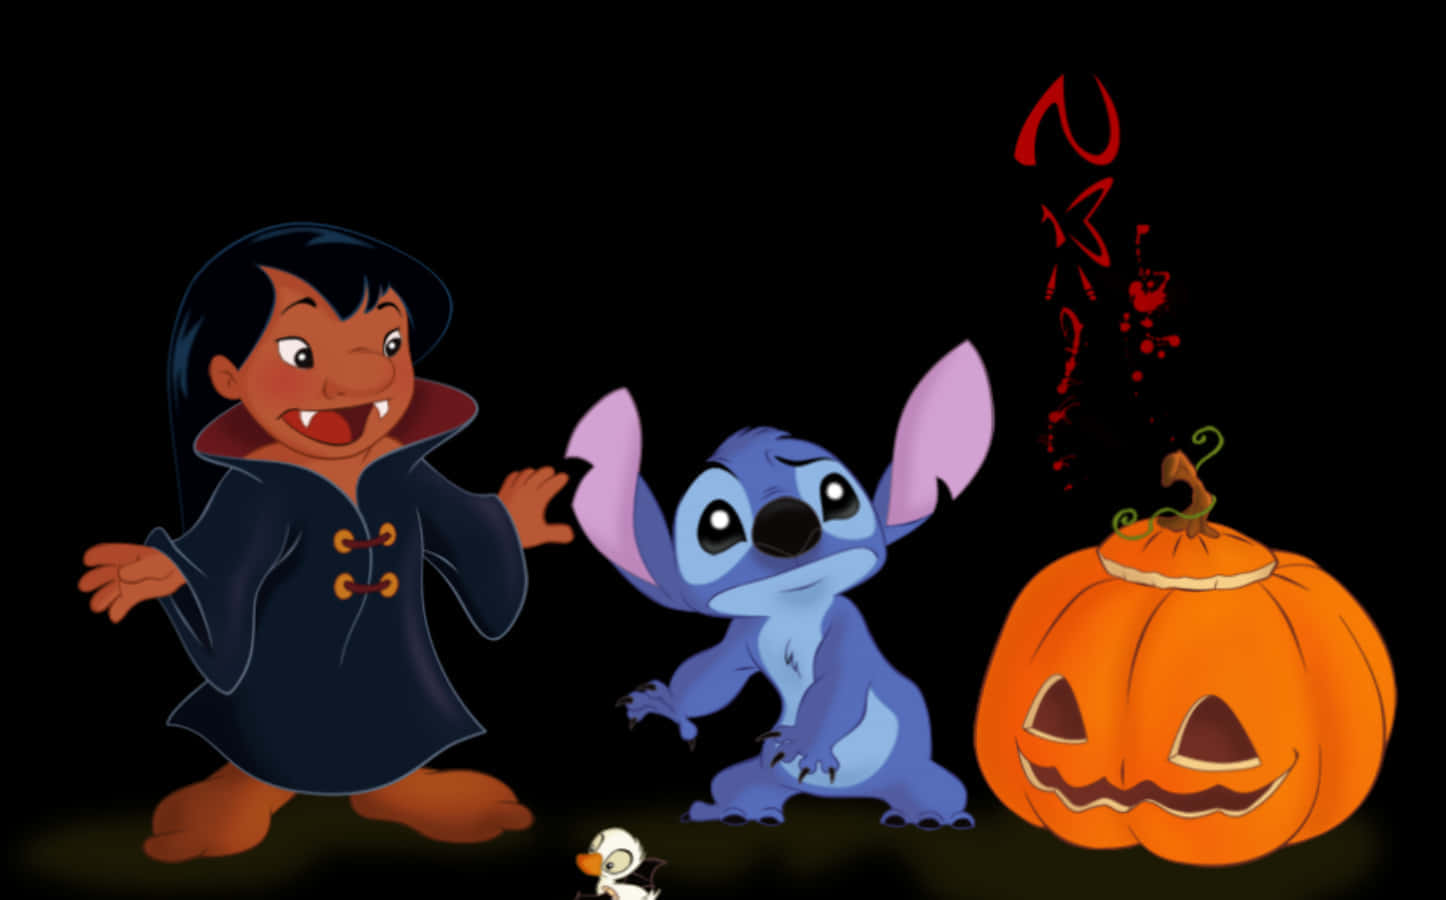 Stitch is spellbound by the spooky spirit of Halloween! Wallpaper